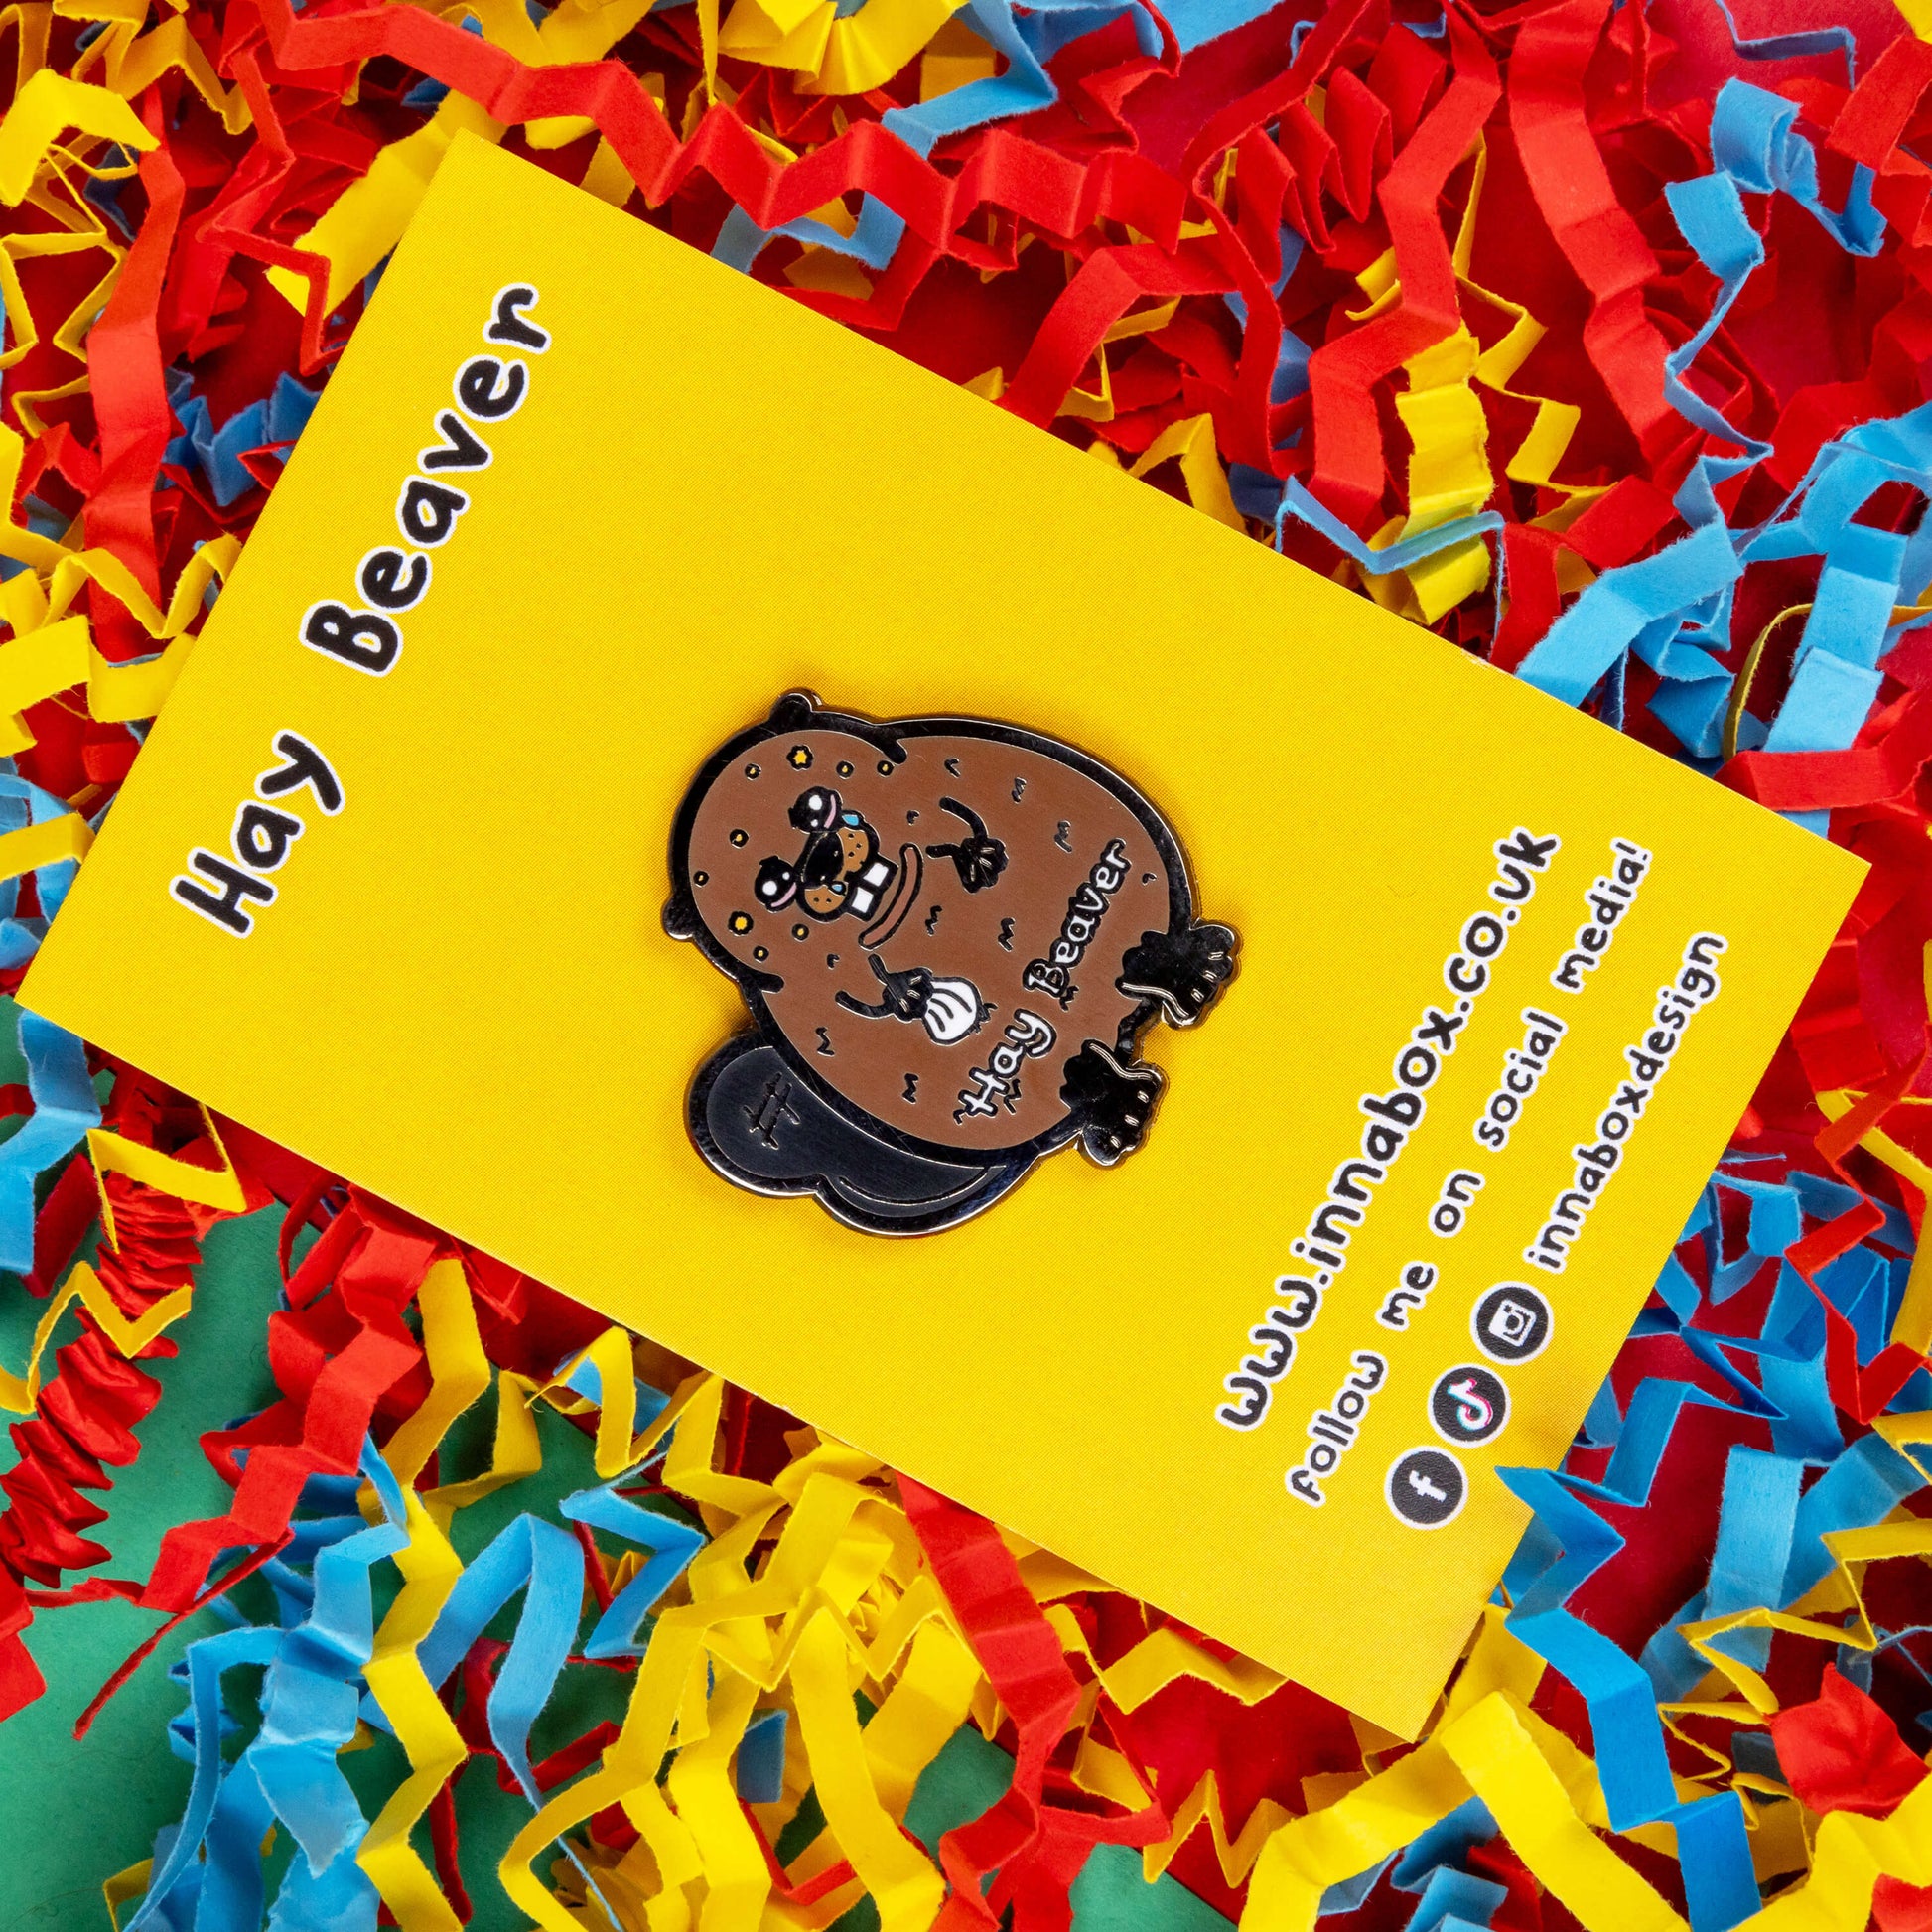 Hay Beaver Enamel Pin - Hay Fever on yellow backing in front of blue, yellow and red coloured card confetti background. The enamel pin is a brown beaver with watery eyes, dripping nose and yellow spots on face and is holding a tissue with it's little hand. Hay beaver is written across its belly. The enamel pin is designed to raise awareness for hay fever or allergic rhinitis